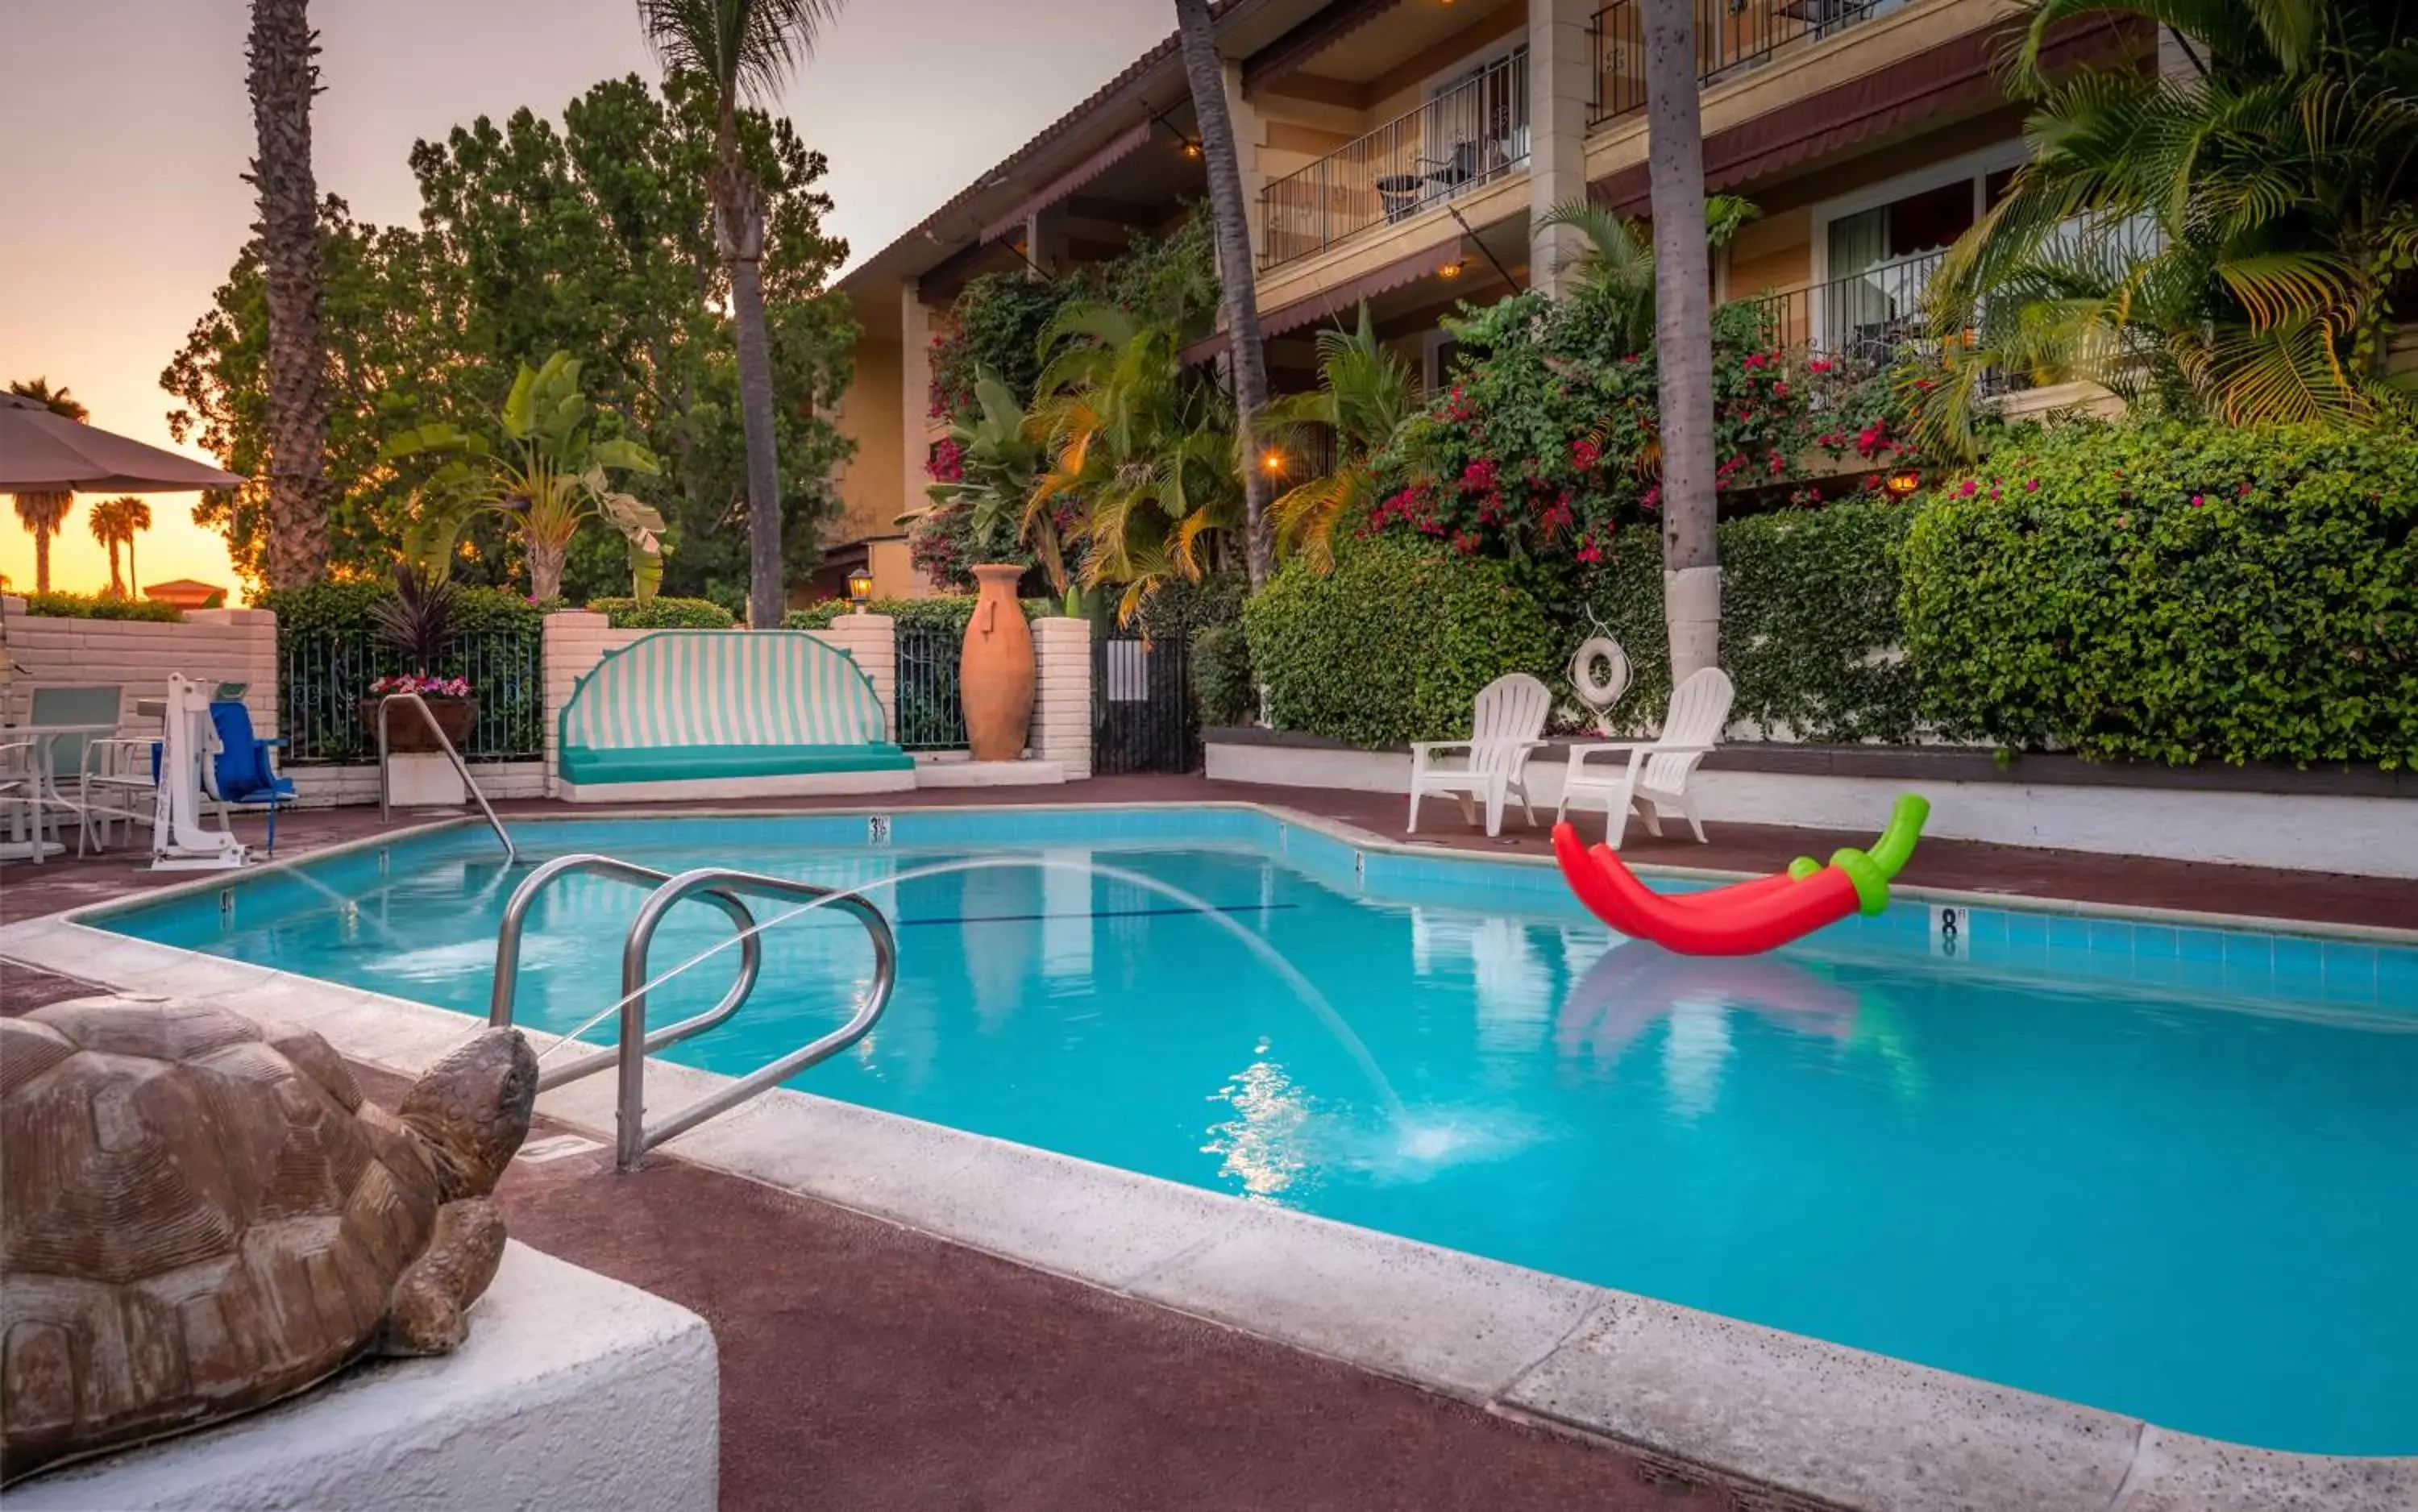 Property building, Swimming Pool in Hotel Pepper Tree Boutique Kitchen Studios - Anaheim